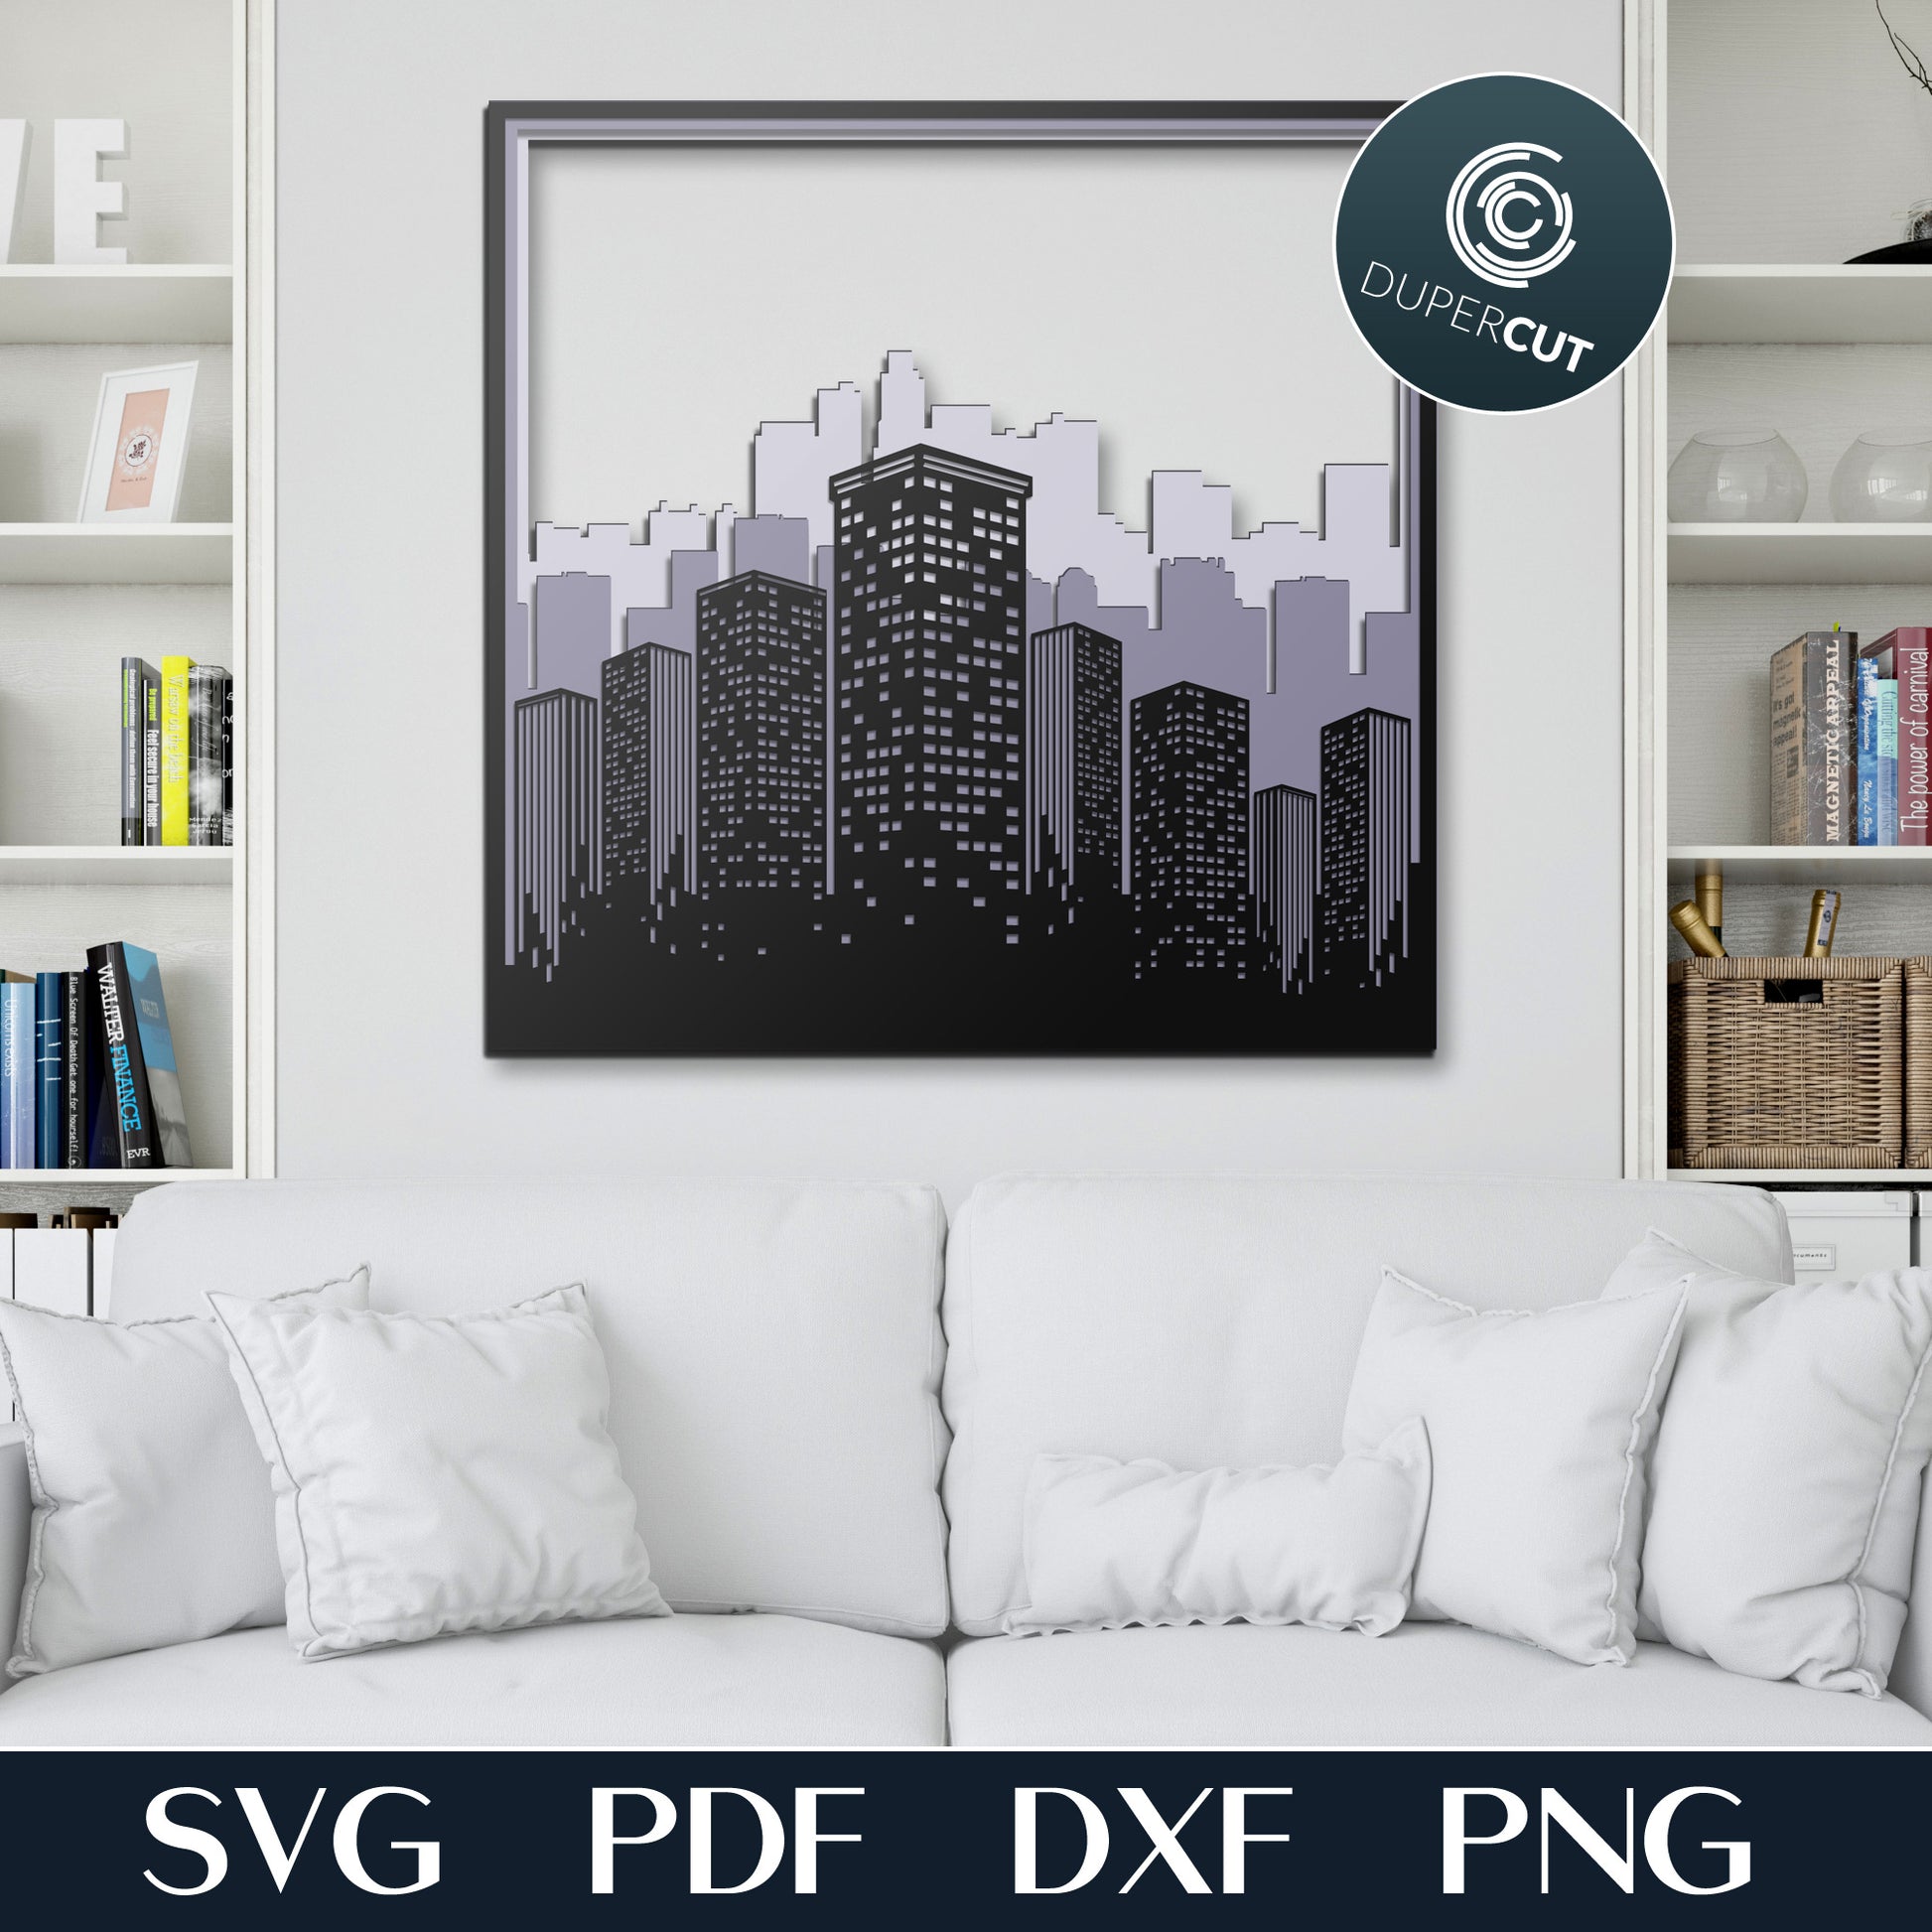 City skyline DIY office wall decoration - layered cutting files - SVG PDF DXF vector template for Glowforge, Cricut, Silhouette Cameo, CNC plasma laser machines by DuperCut